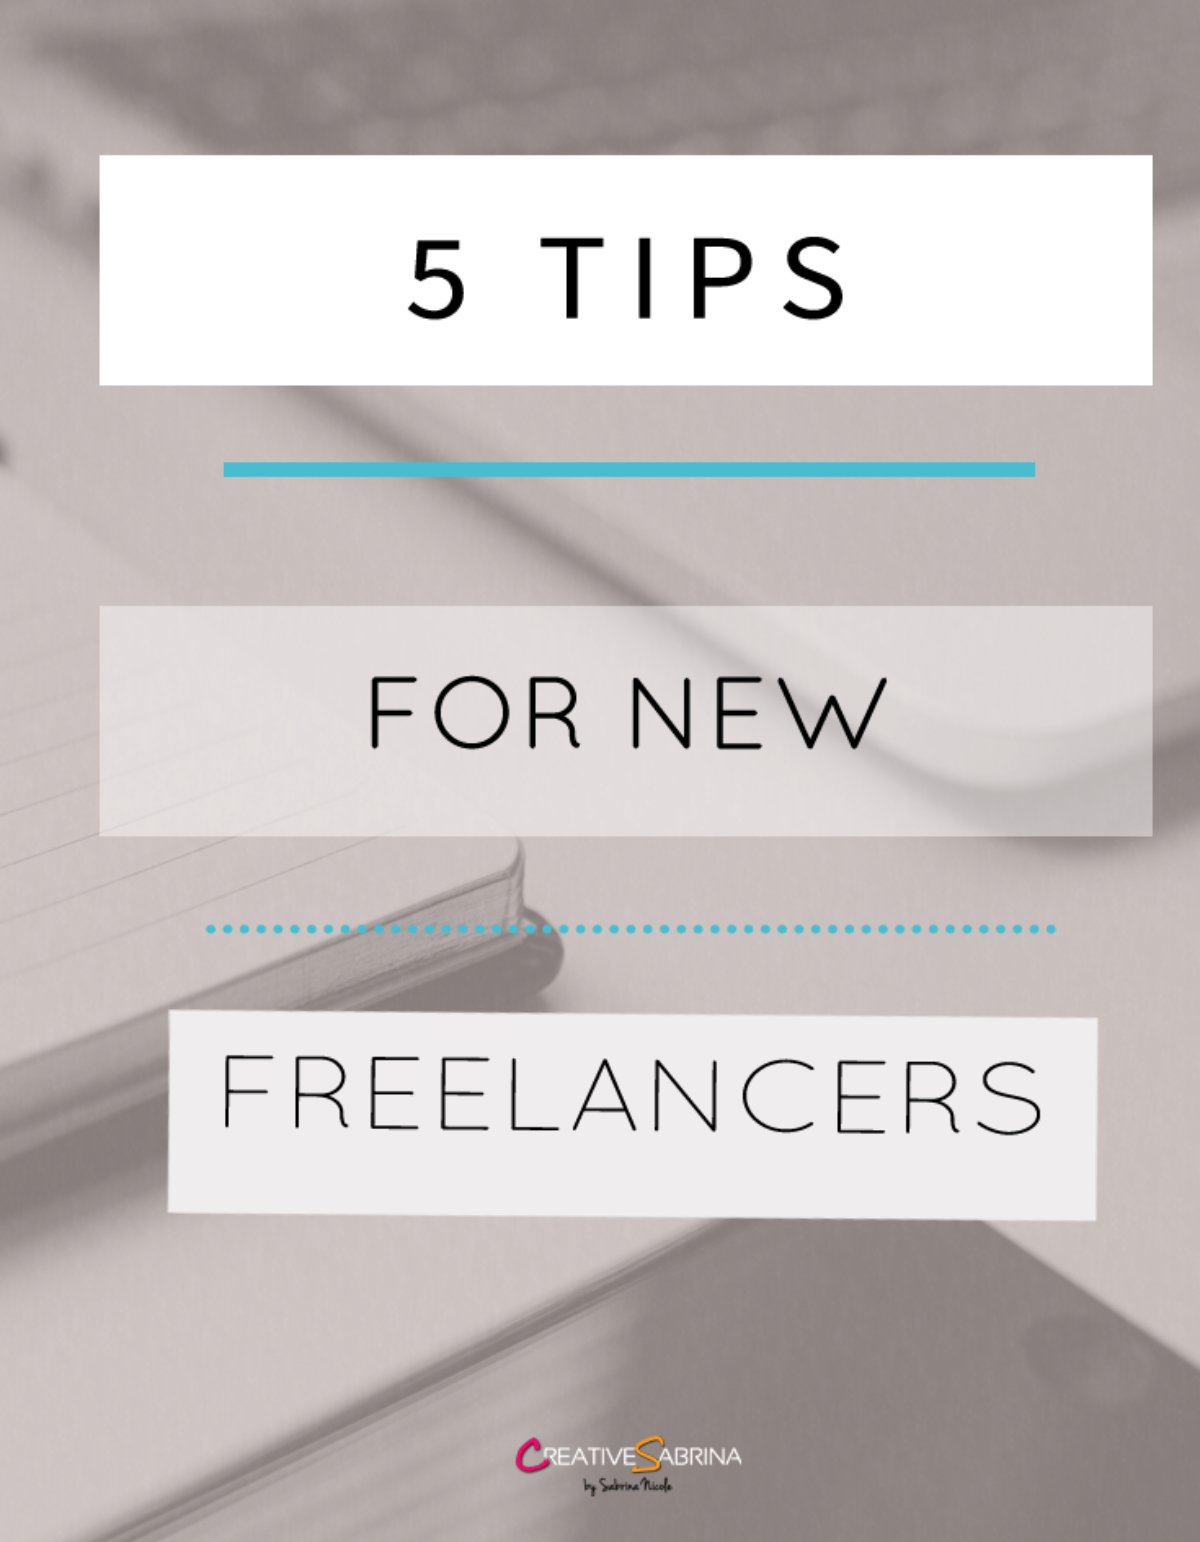 5 Tips for New Freelancers